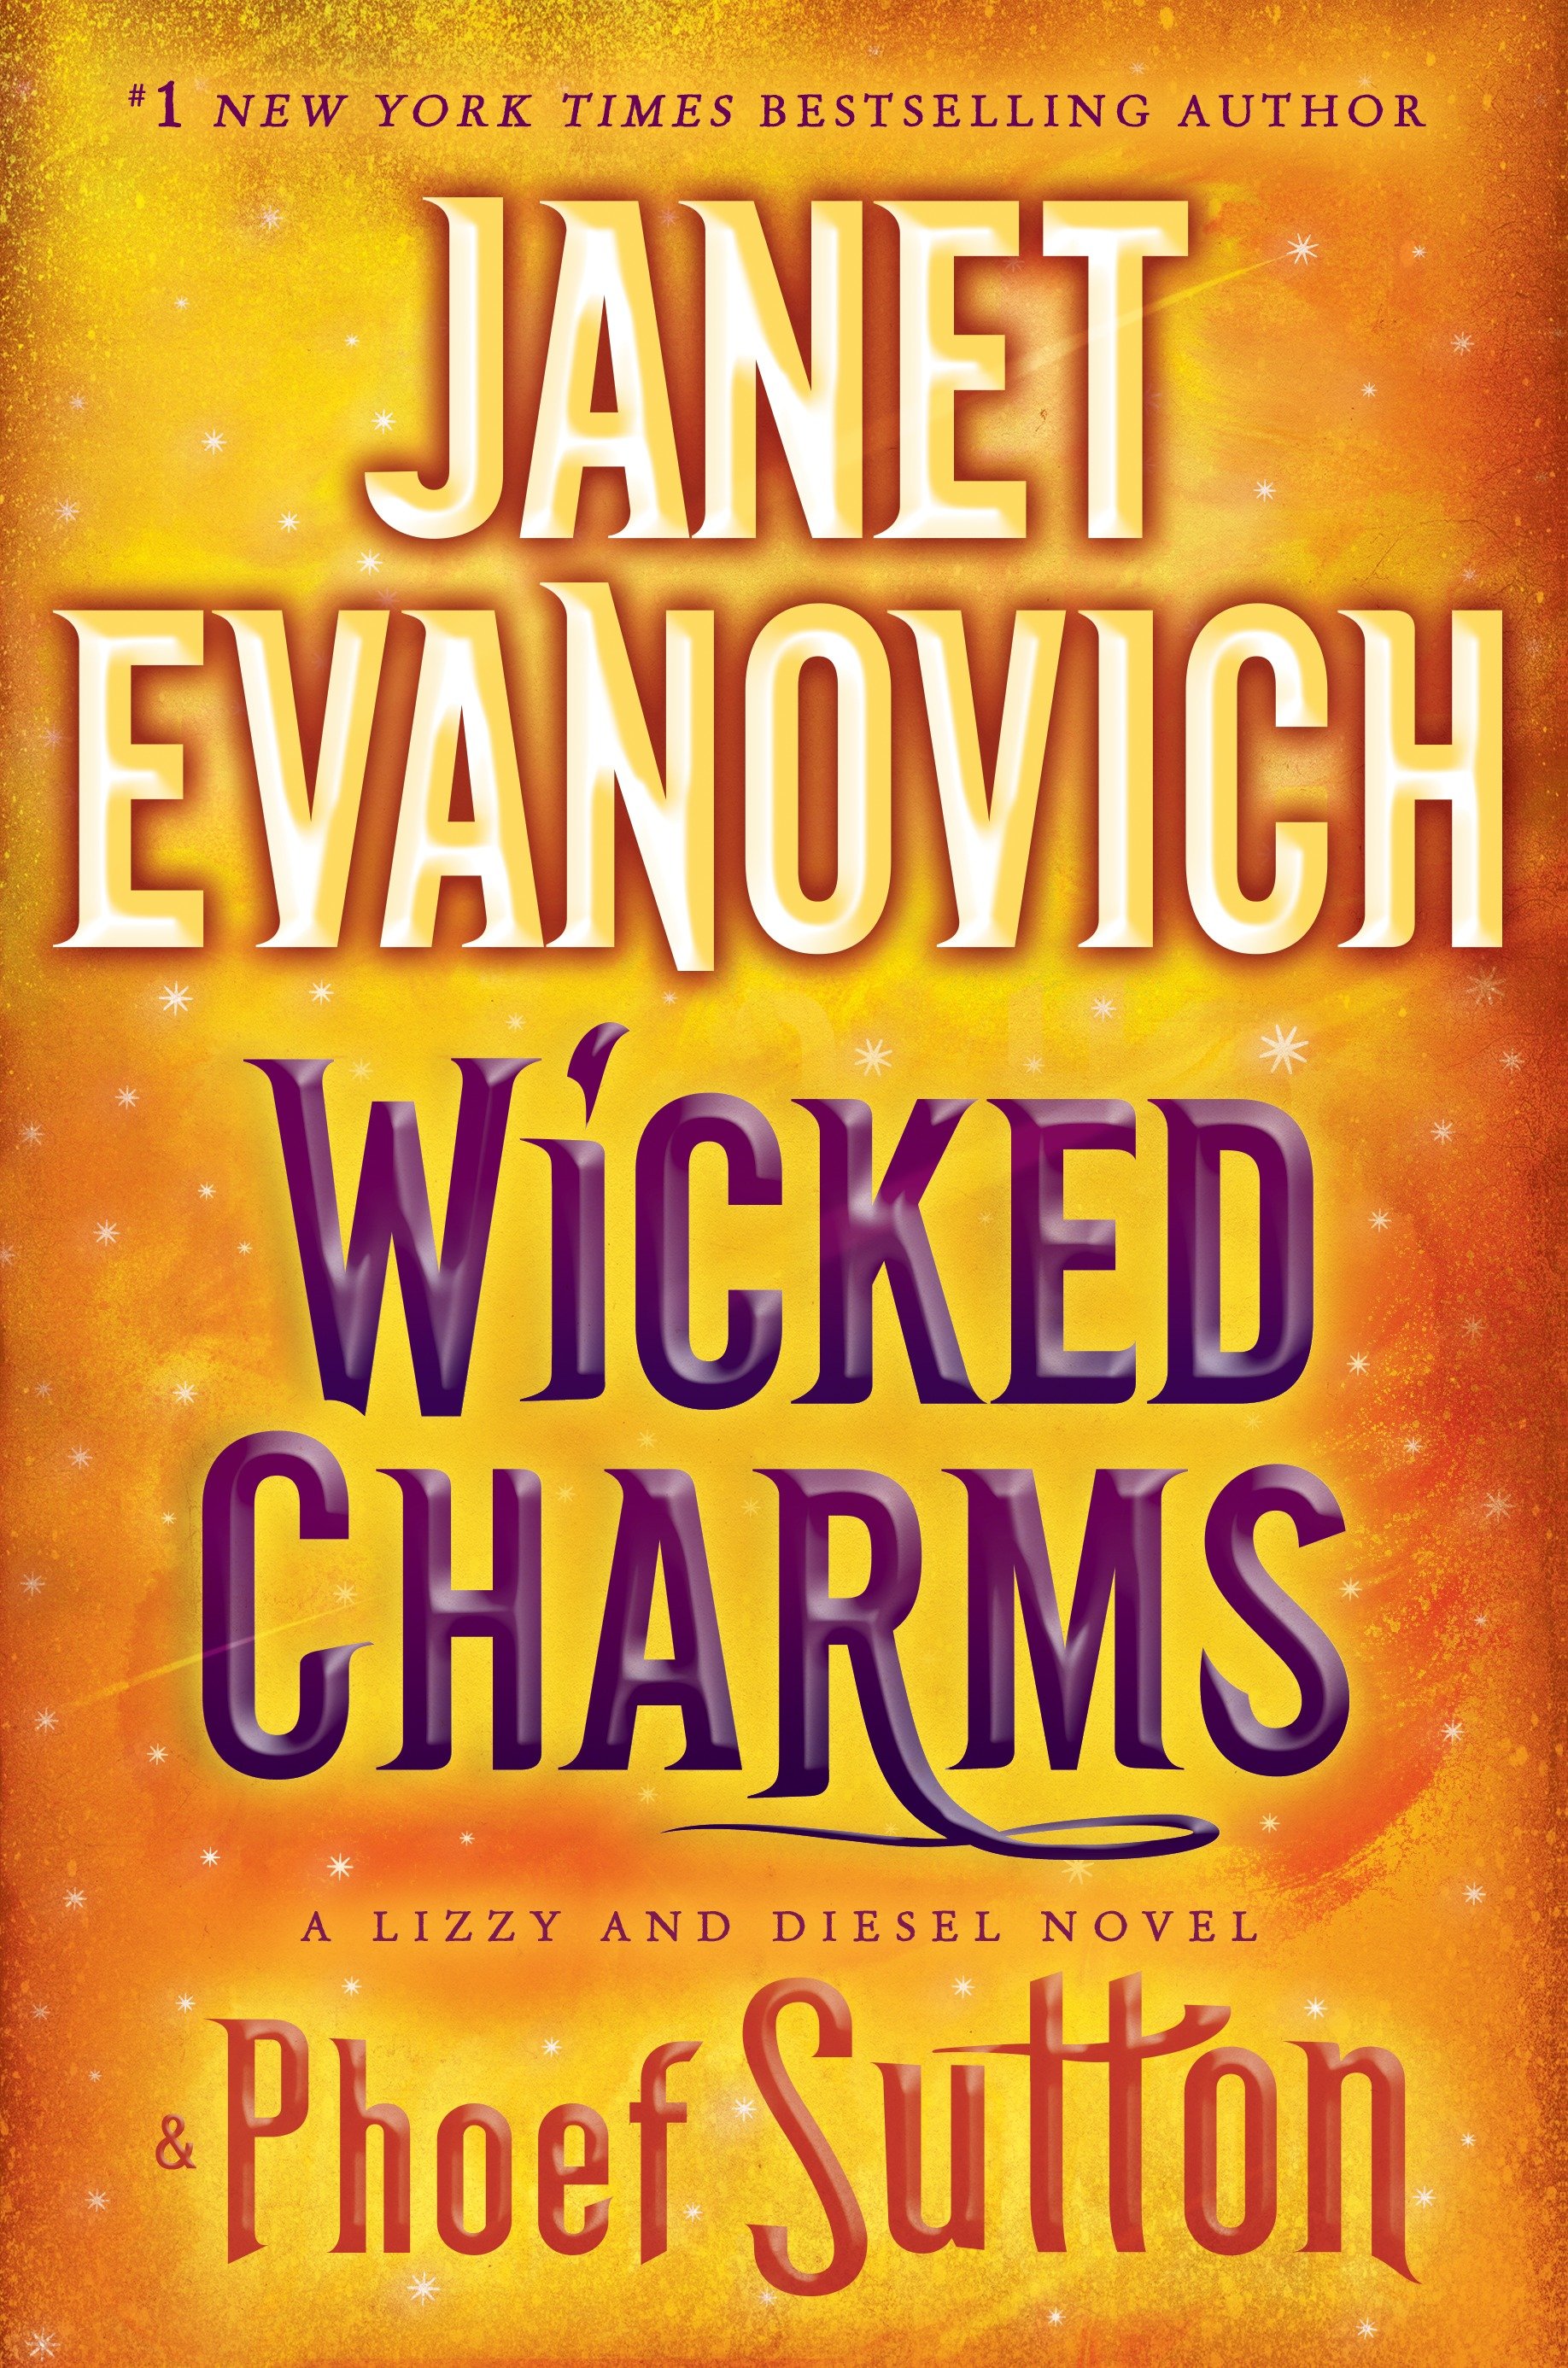 Wicked charmsl cover image